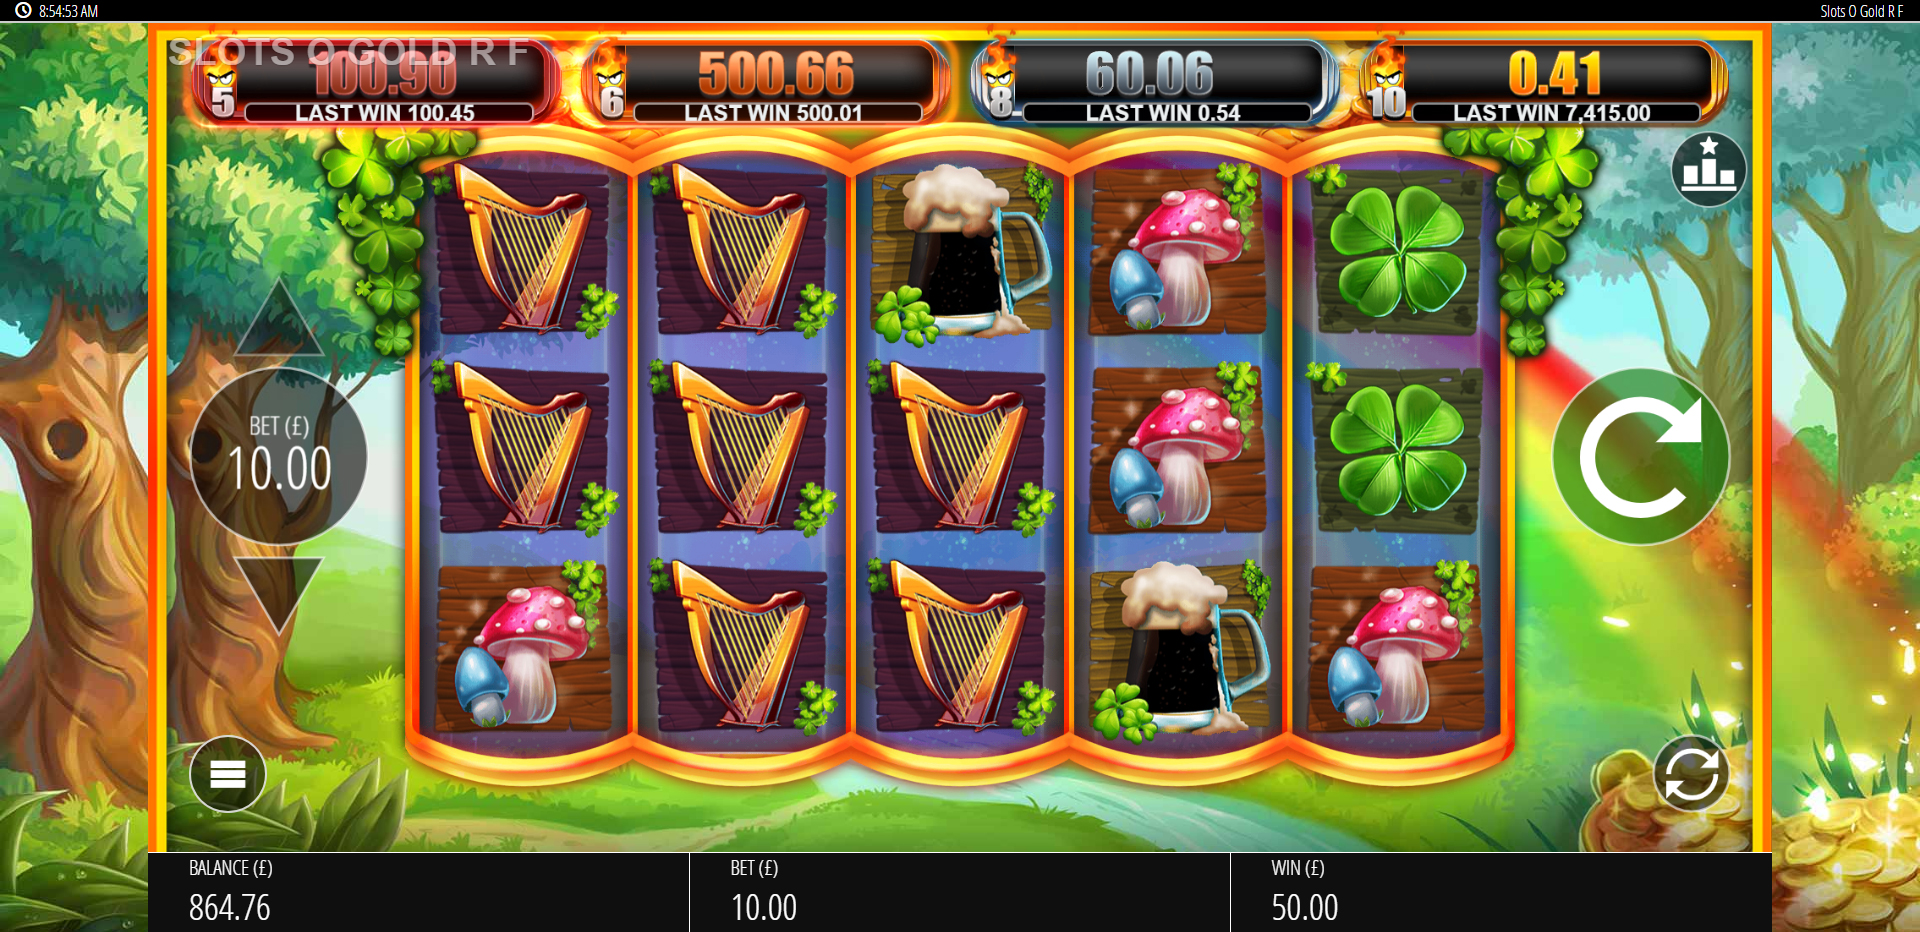 Download online slots canada players